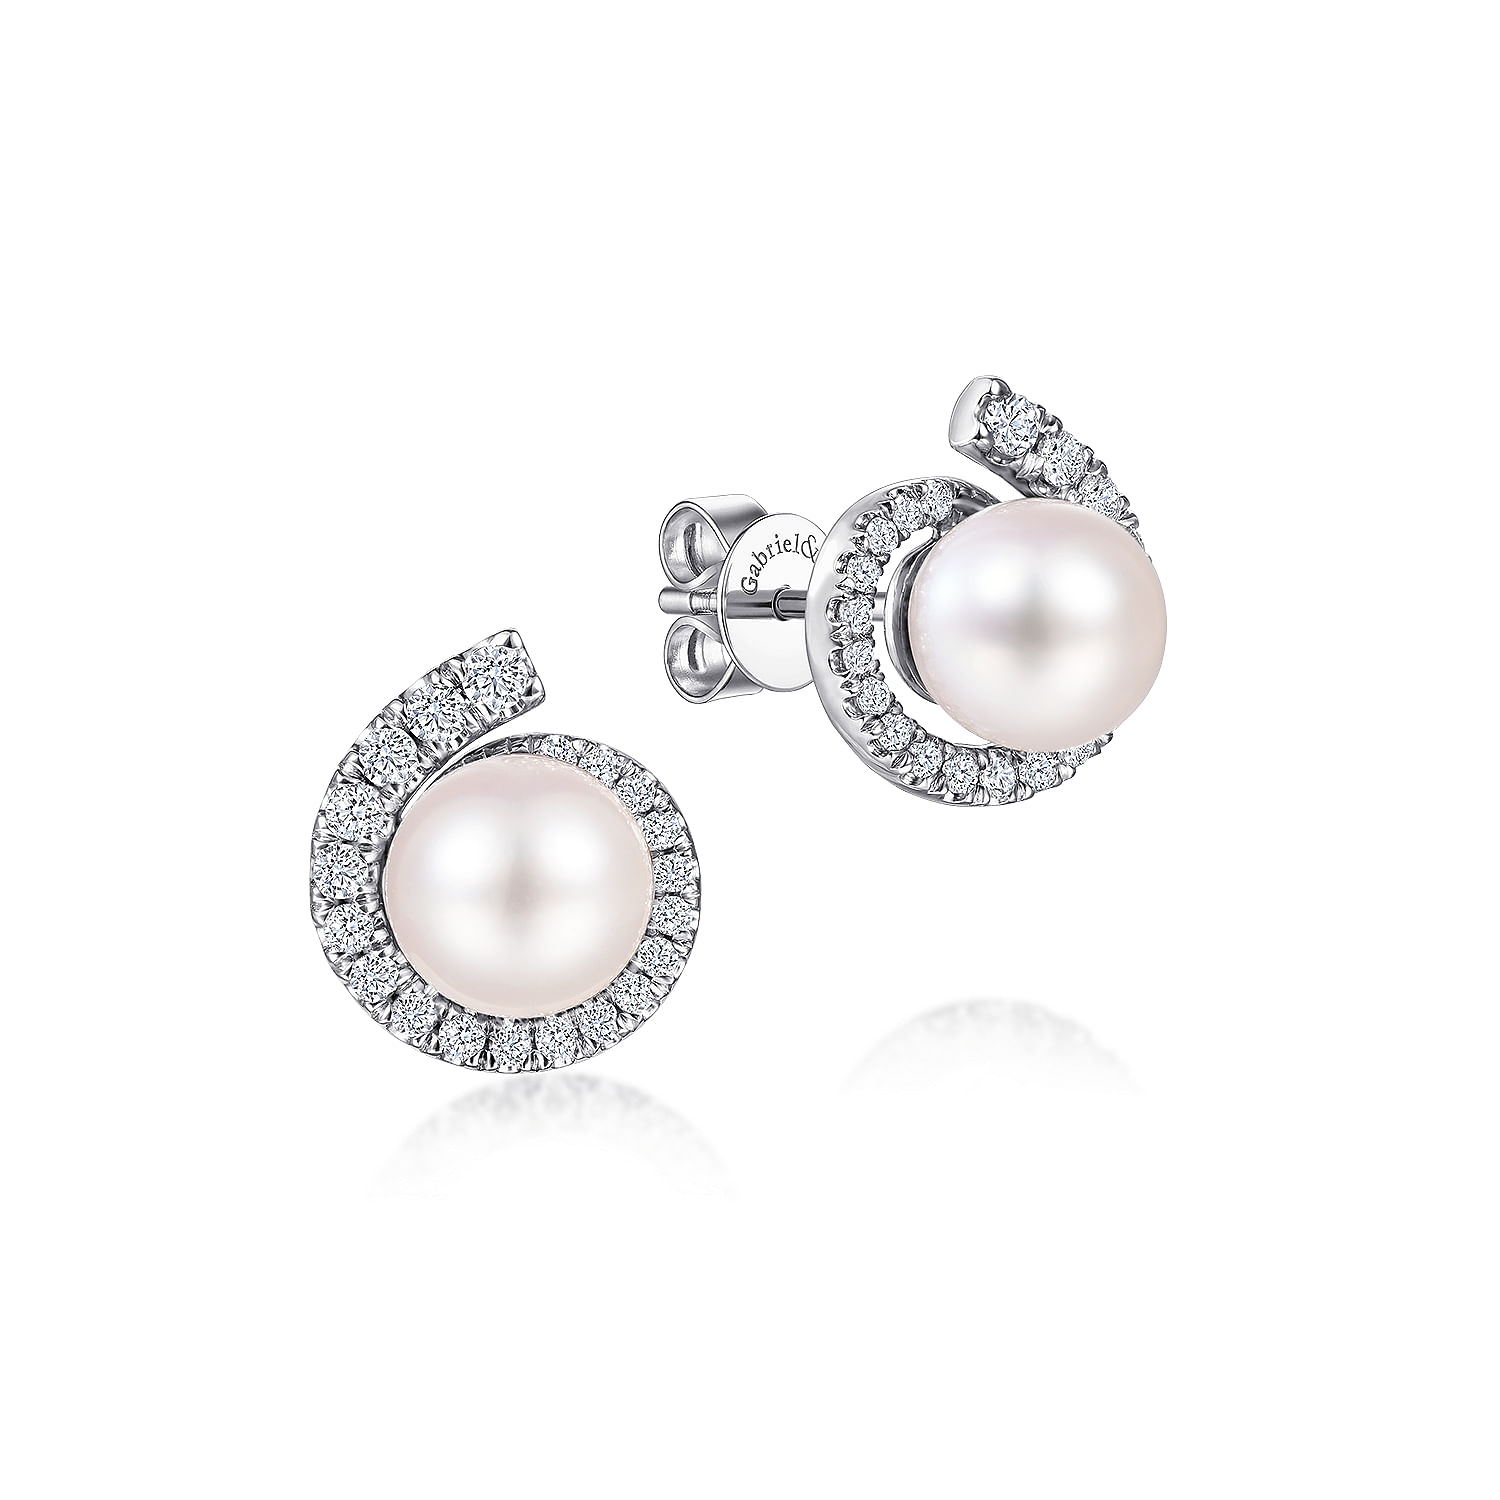 14K White Gold Pearl Stud Earrings with Diamond Halo